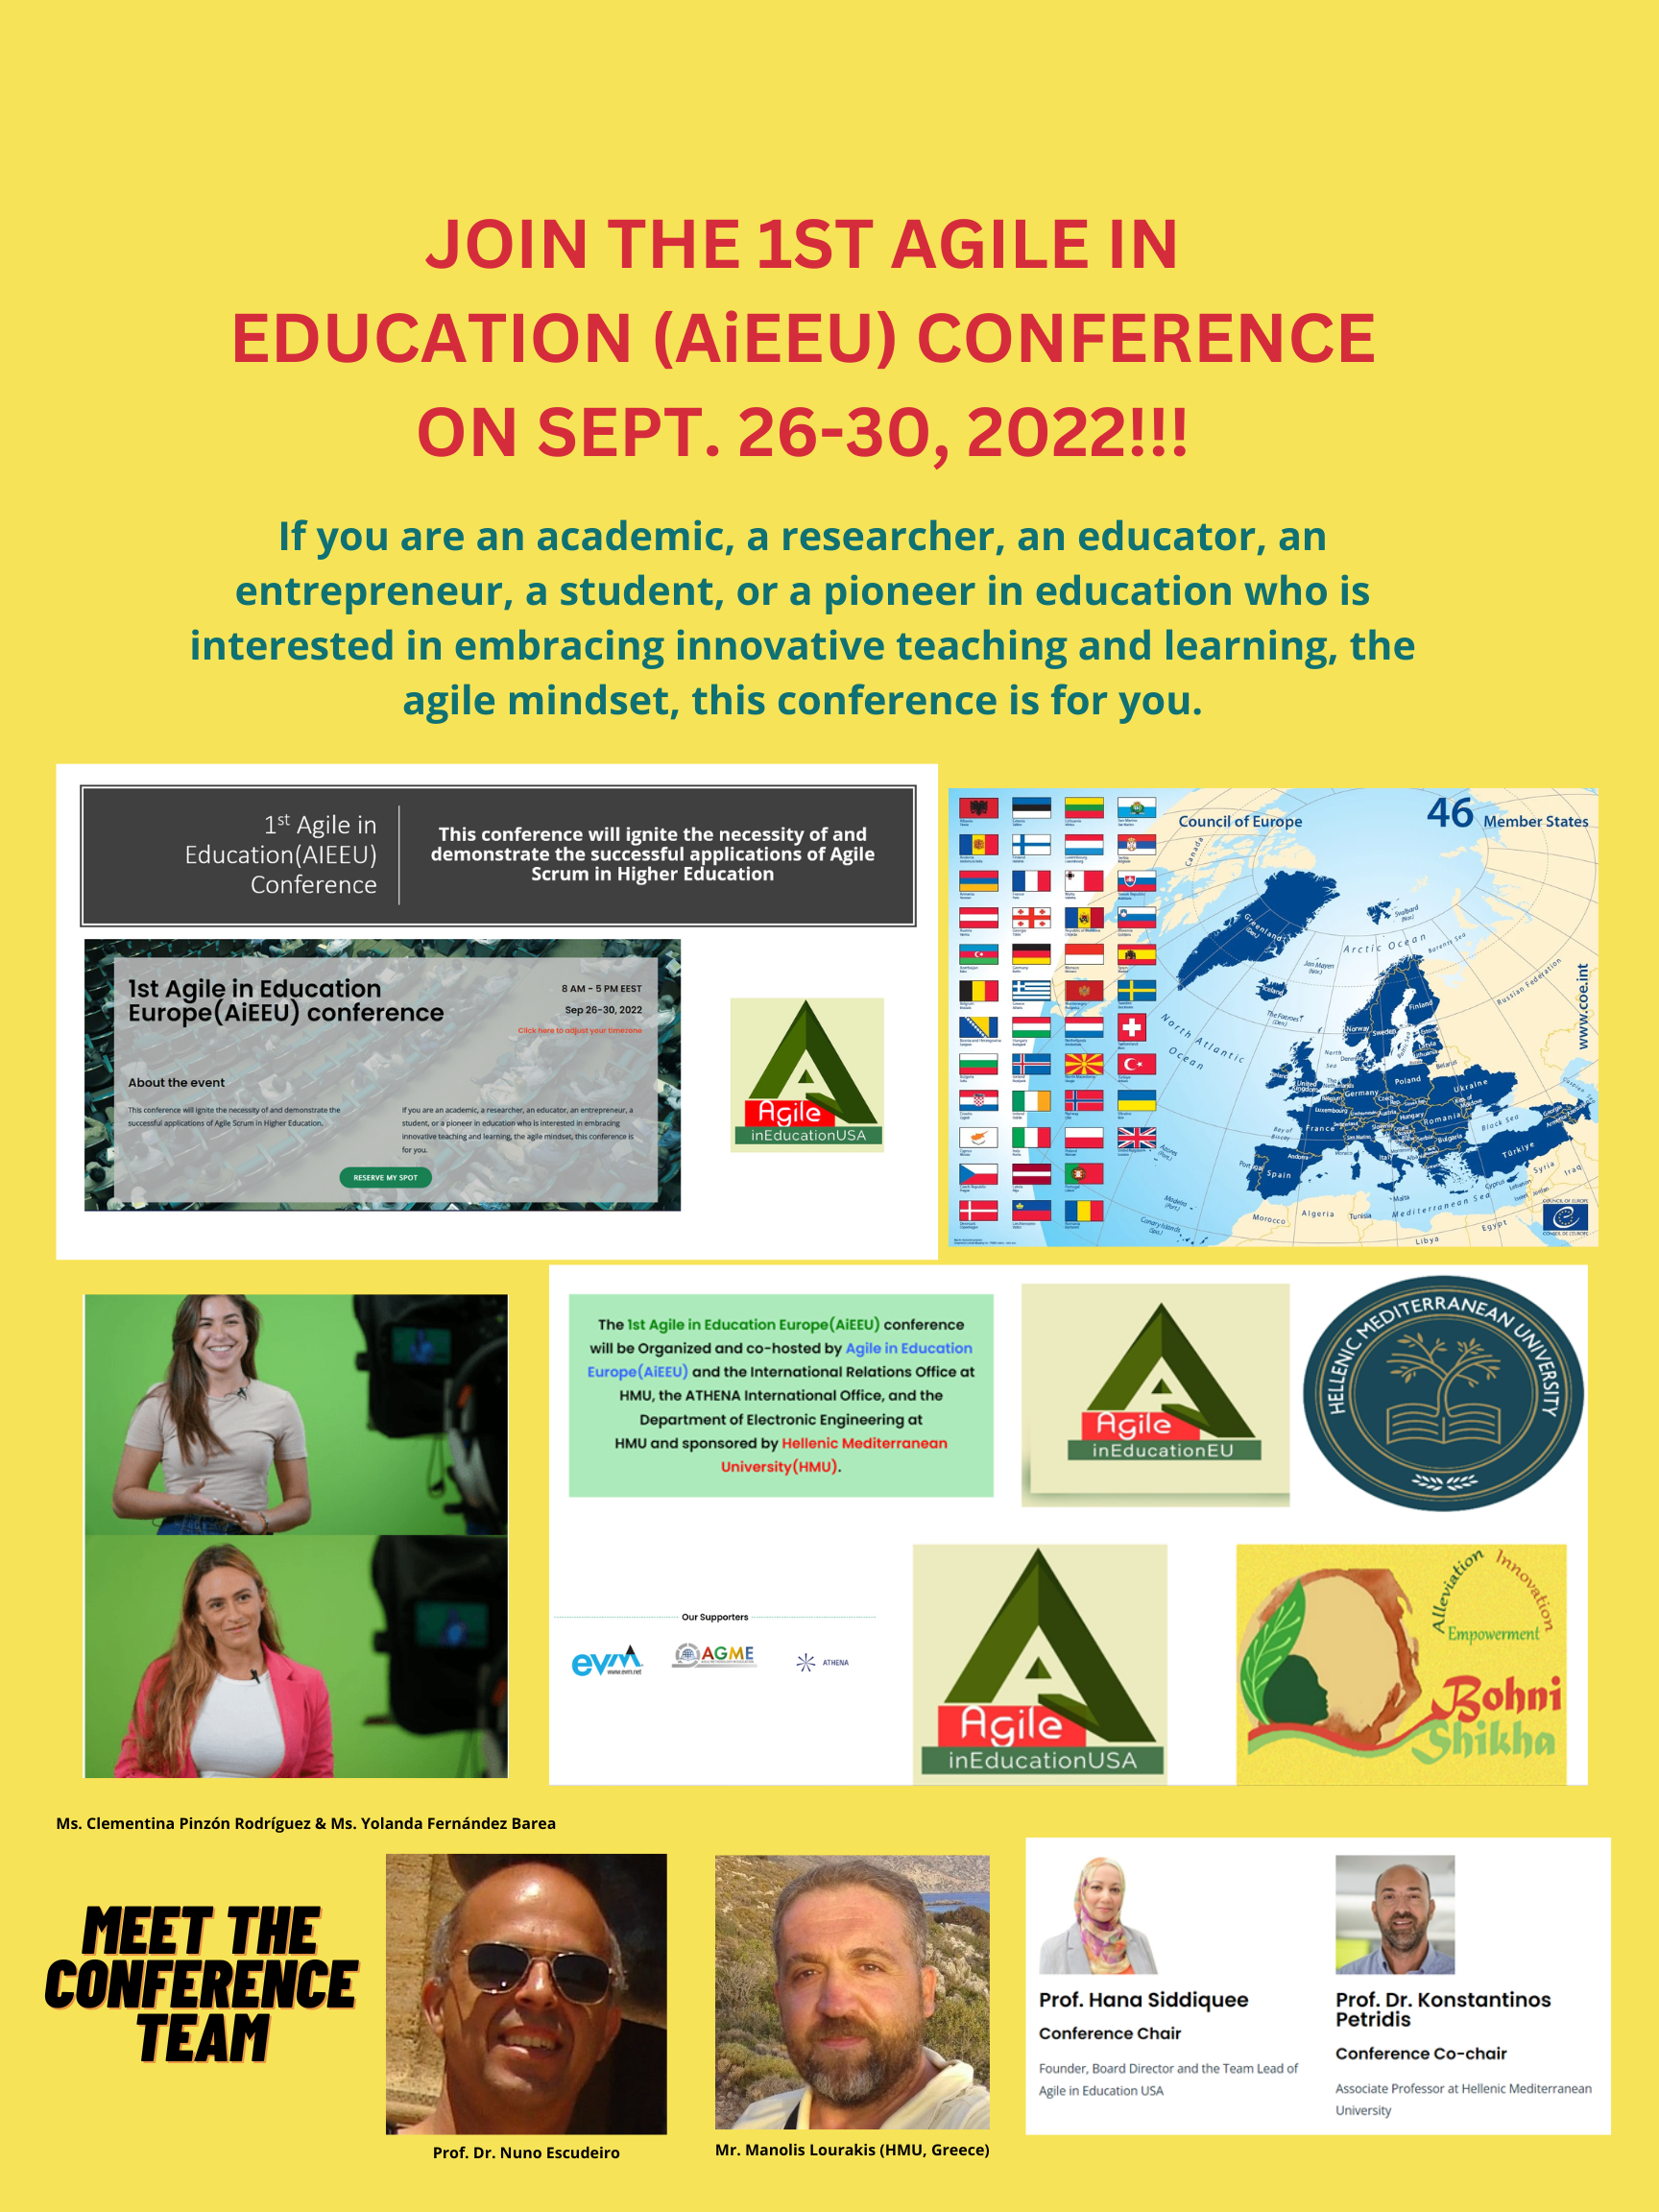 1st Europe Agile in Education Conference parallel to the International Week